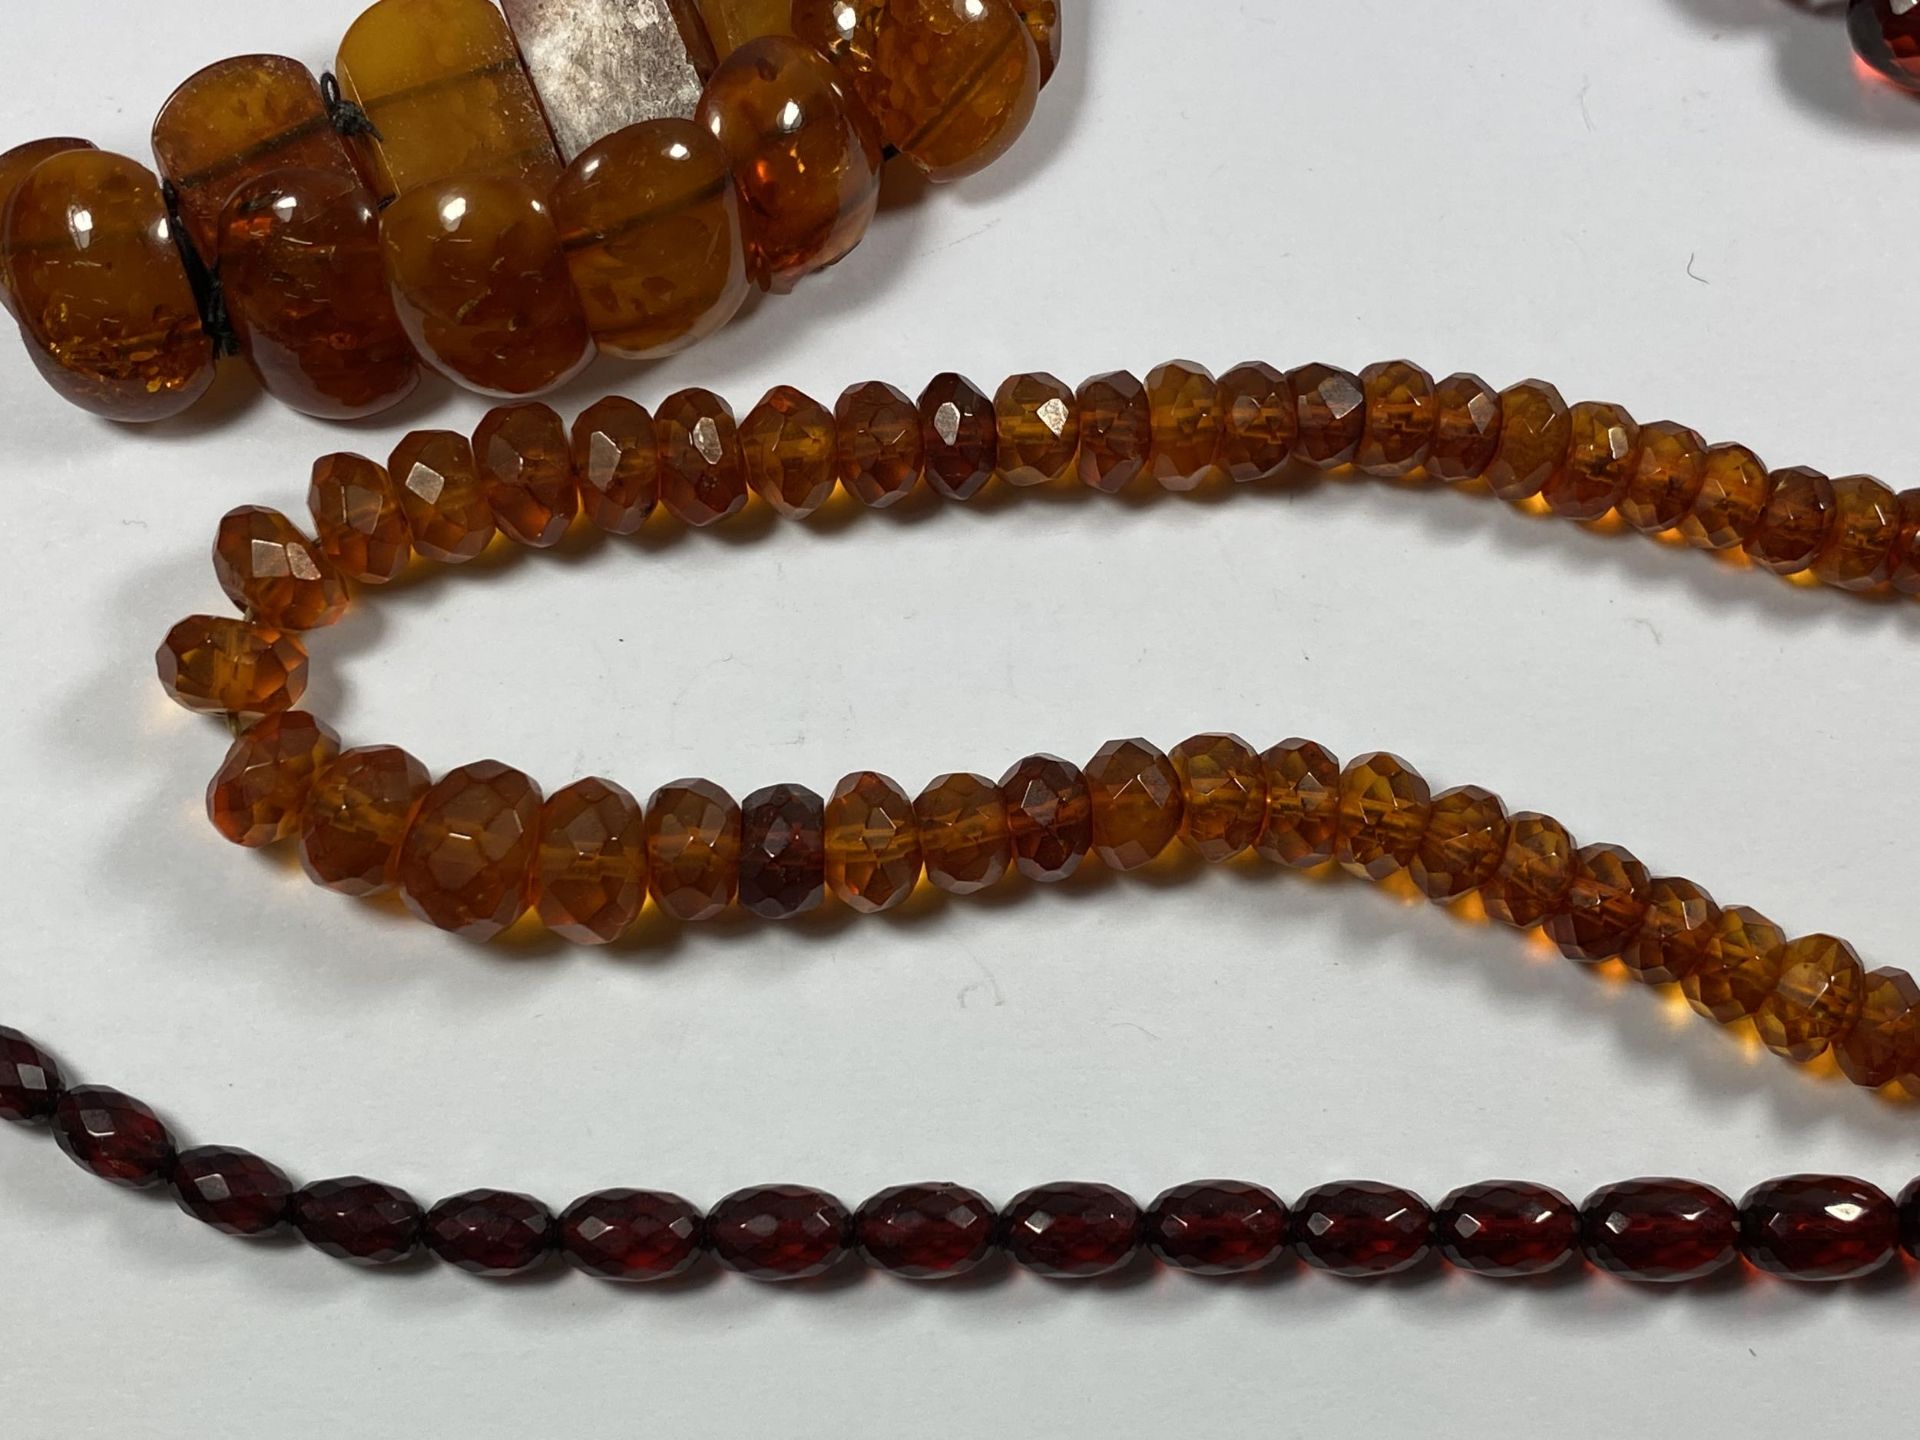 THREE BEADED ITEMS - RED GLASS NECKLACE, AMBER EFFECT BRACELET AND NECKLACE - Image 4 of 5